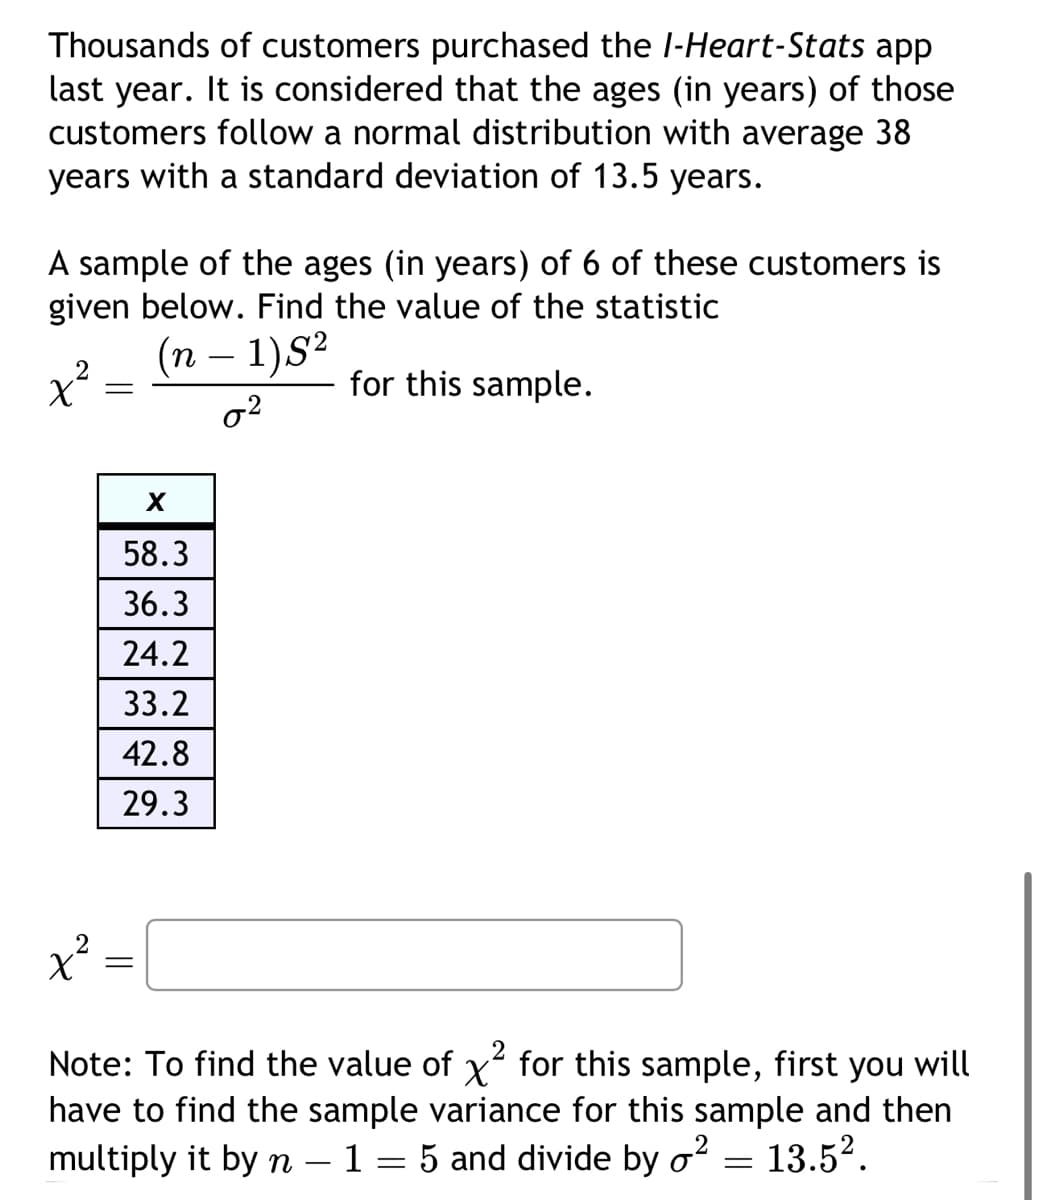 Thousands of customers purchased the I-Heart-Stats app
last year. It is considered that the ages (in years) of those
customers follow a normal distribution with average 38
years with a standard deviation of 13.5 years.
A sample of the ages (in years) of 6 of these customers is
given below. Find the value of the statistic
(n − 1)S²
0²
for this sample.
x²
x²
=
X
58.3
36.3
24.2
33.2
42.8
29.3
=
Note: To find the value of x² for this sample, first you will
have to find the sample variance for this sample and then
multiply it by n - 1 = 5 and divide by o² 13.5².
=